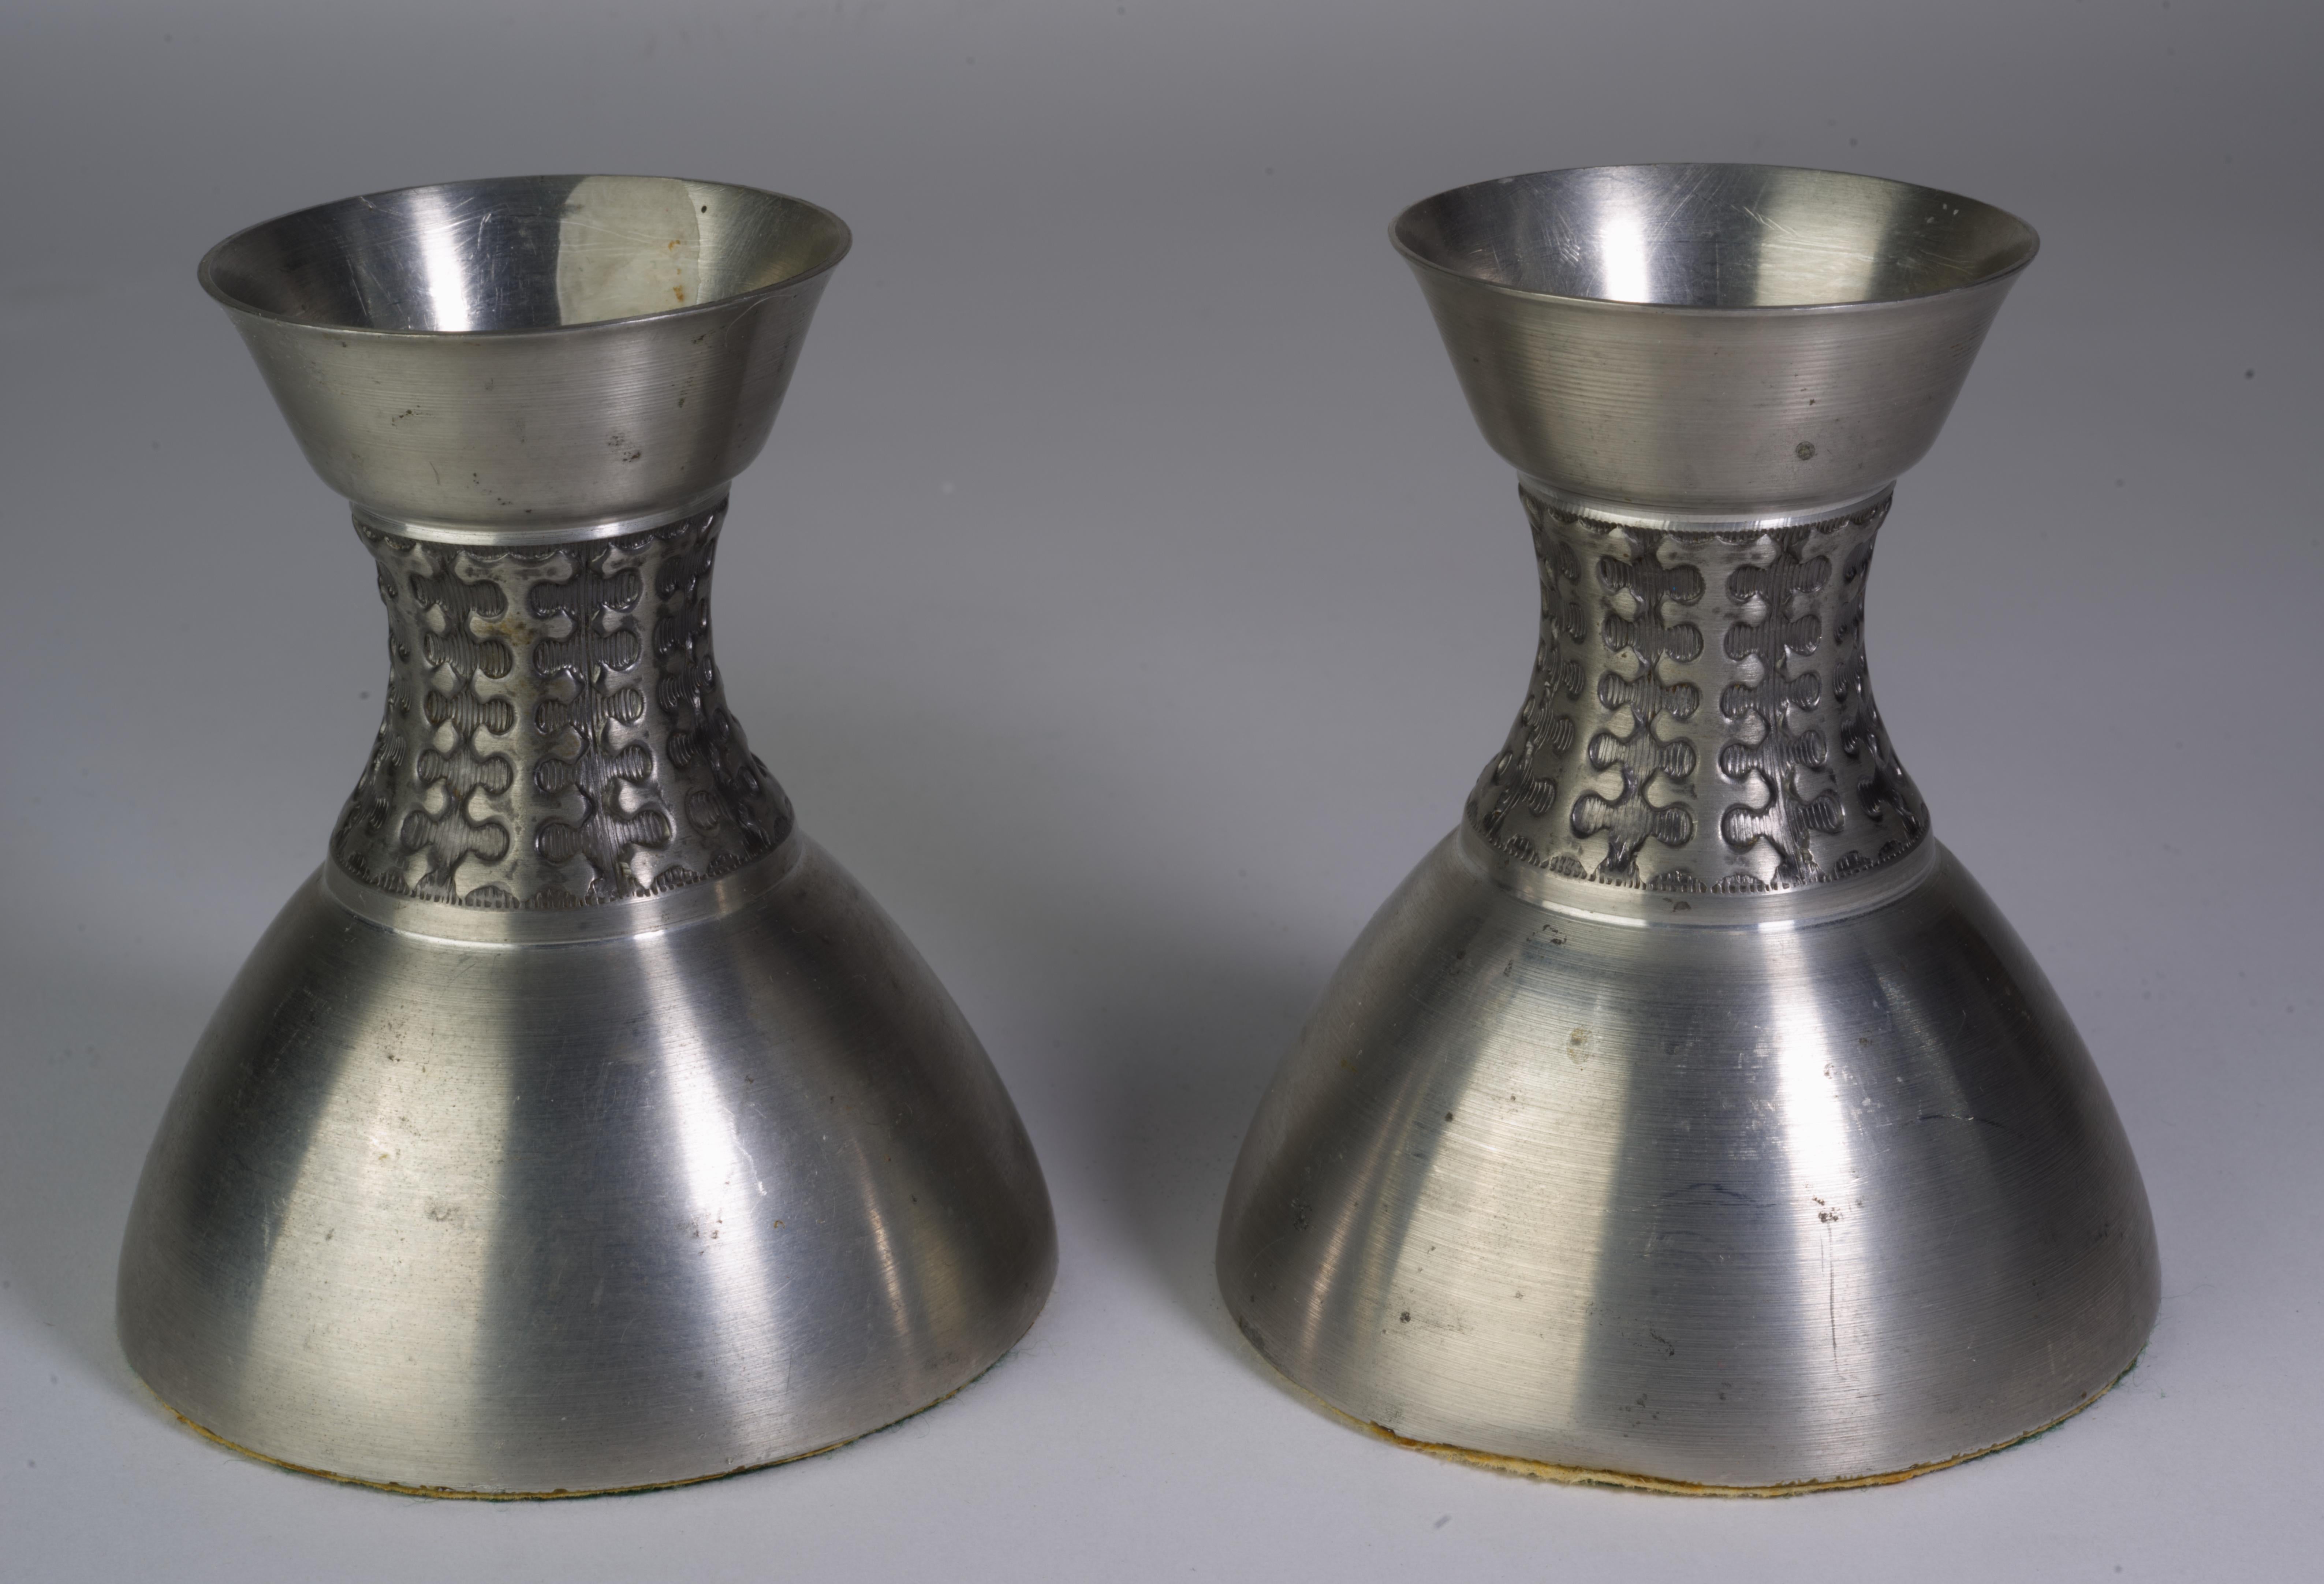  Rare pair of pewter candle holders in Scandinavian Midcentury Modern style was made by Mastad Norway in 1950s. Each candle holder has built-in bobeche to prevent wax drippage, weighted base, and felt pad on the bottom. They are signed with